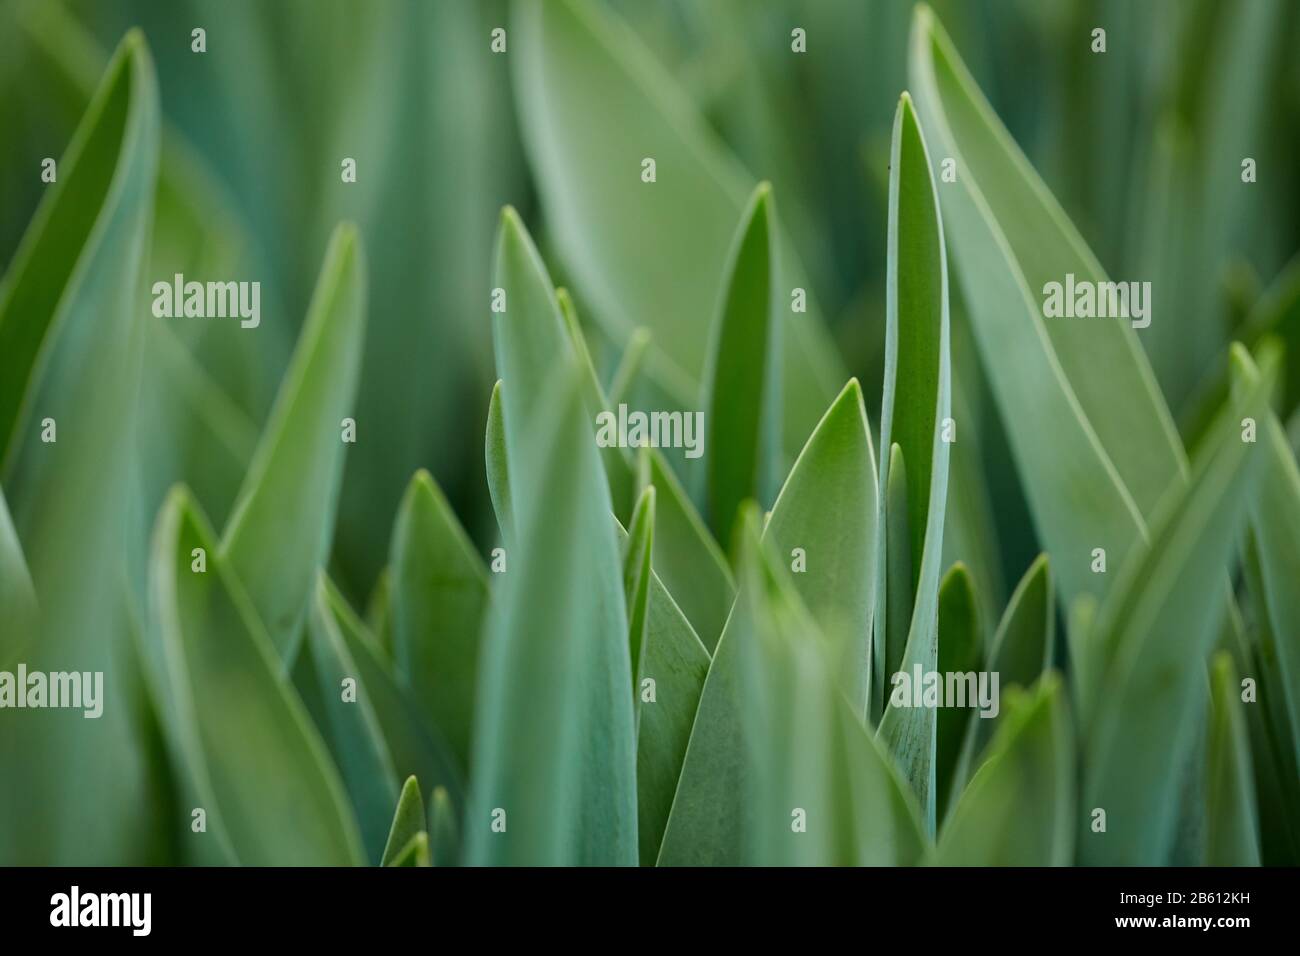 Background image of long green flower leaves in garden or plantation, Spring and growth concept, copy space Stock Photo